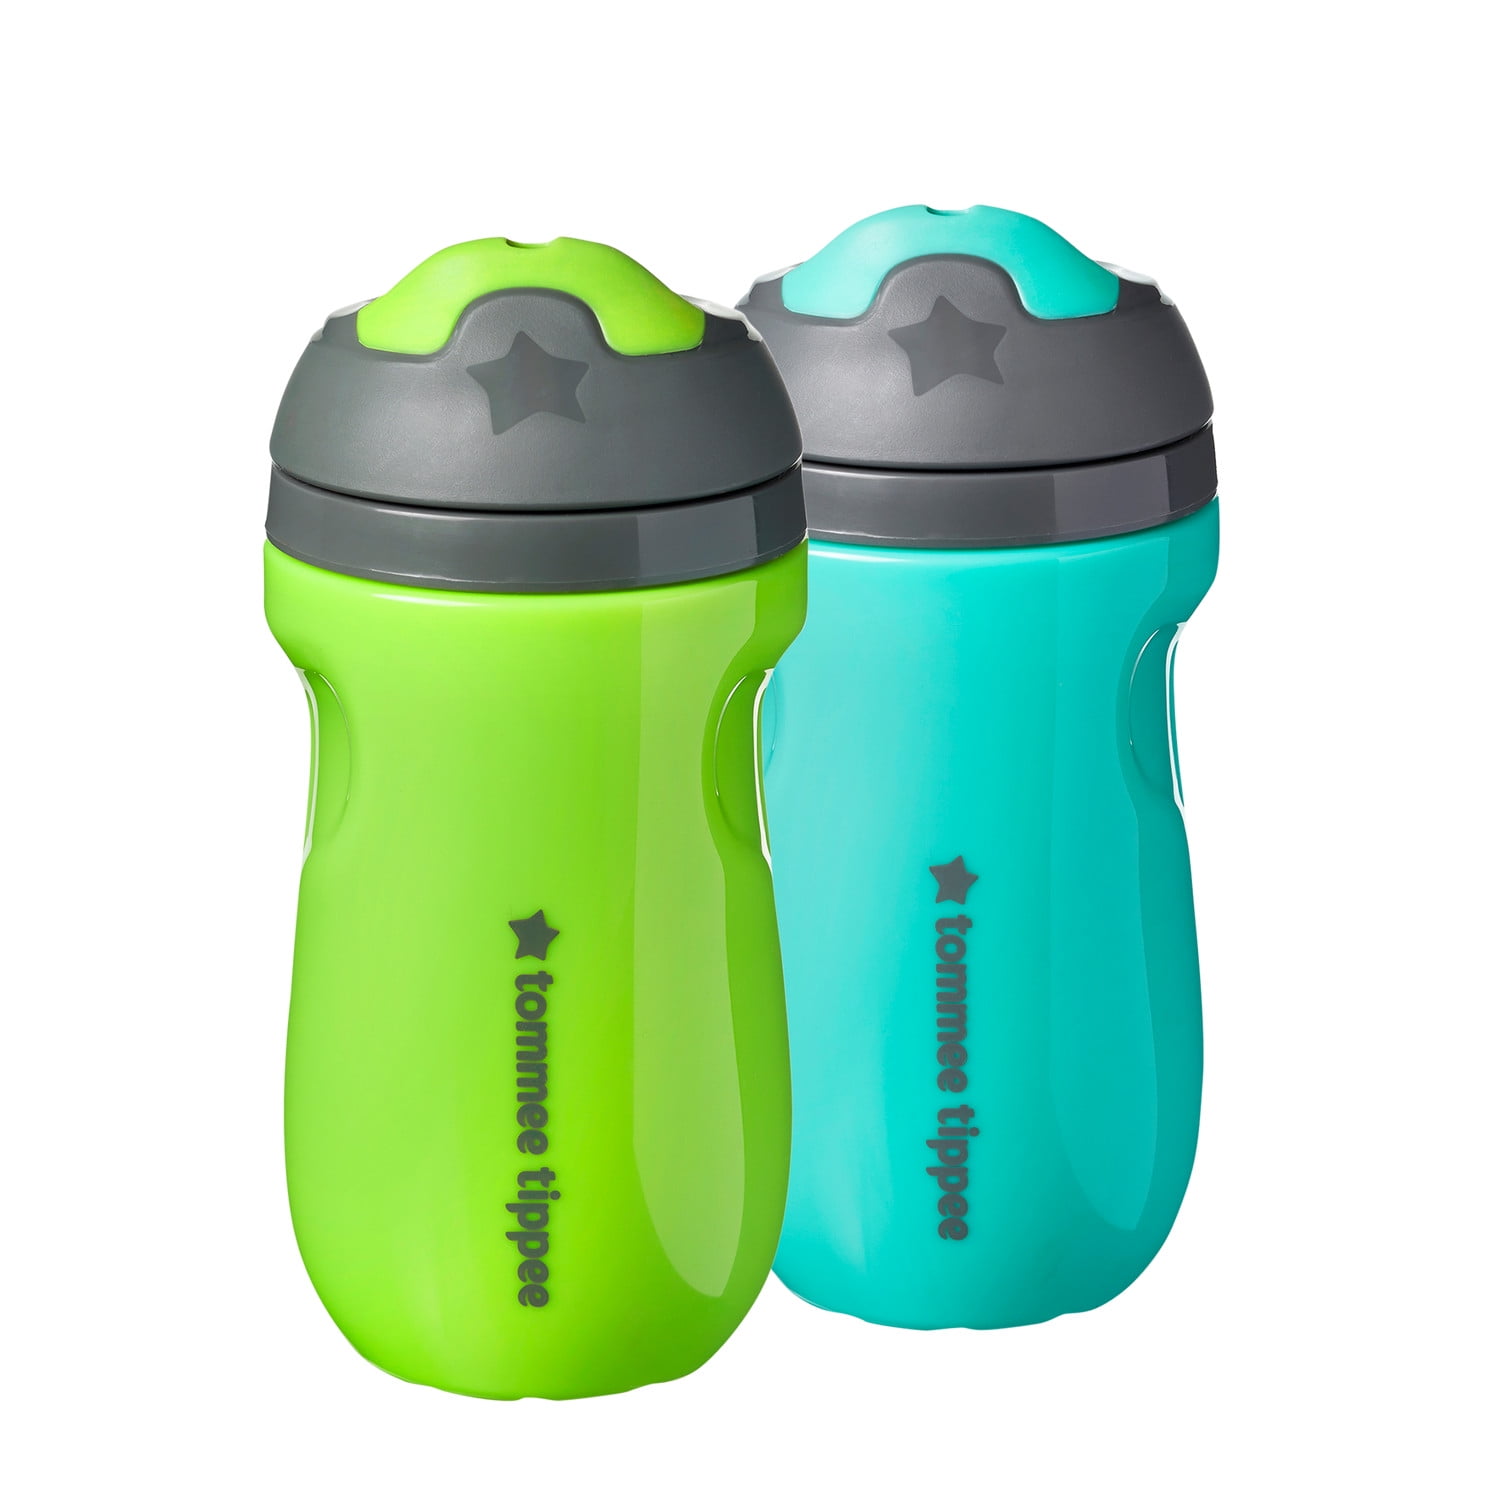 Tommee Tippee Insulated Sippee Cup (9oz, 12+ Months, 2 Count) Water Bottle  for Toddlers, Spill-Proof, BPA Free, Colorful and Playful Designs 